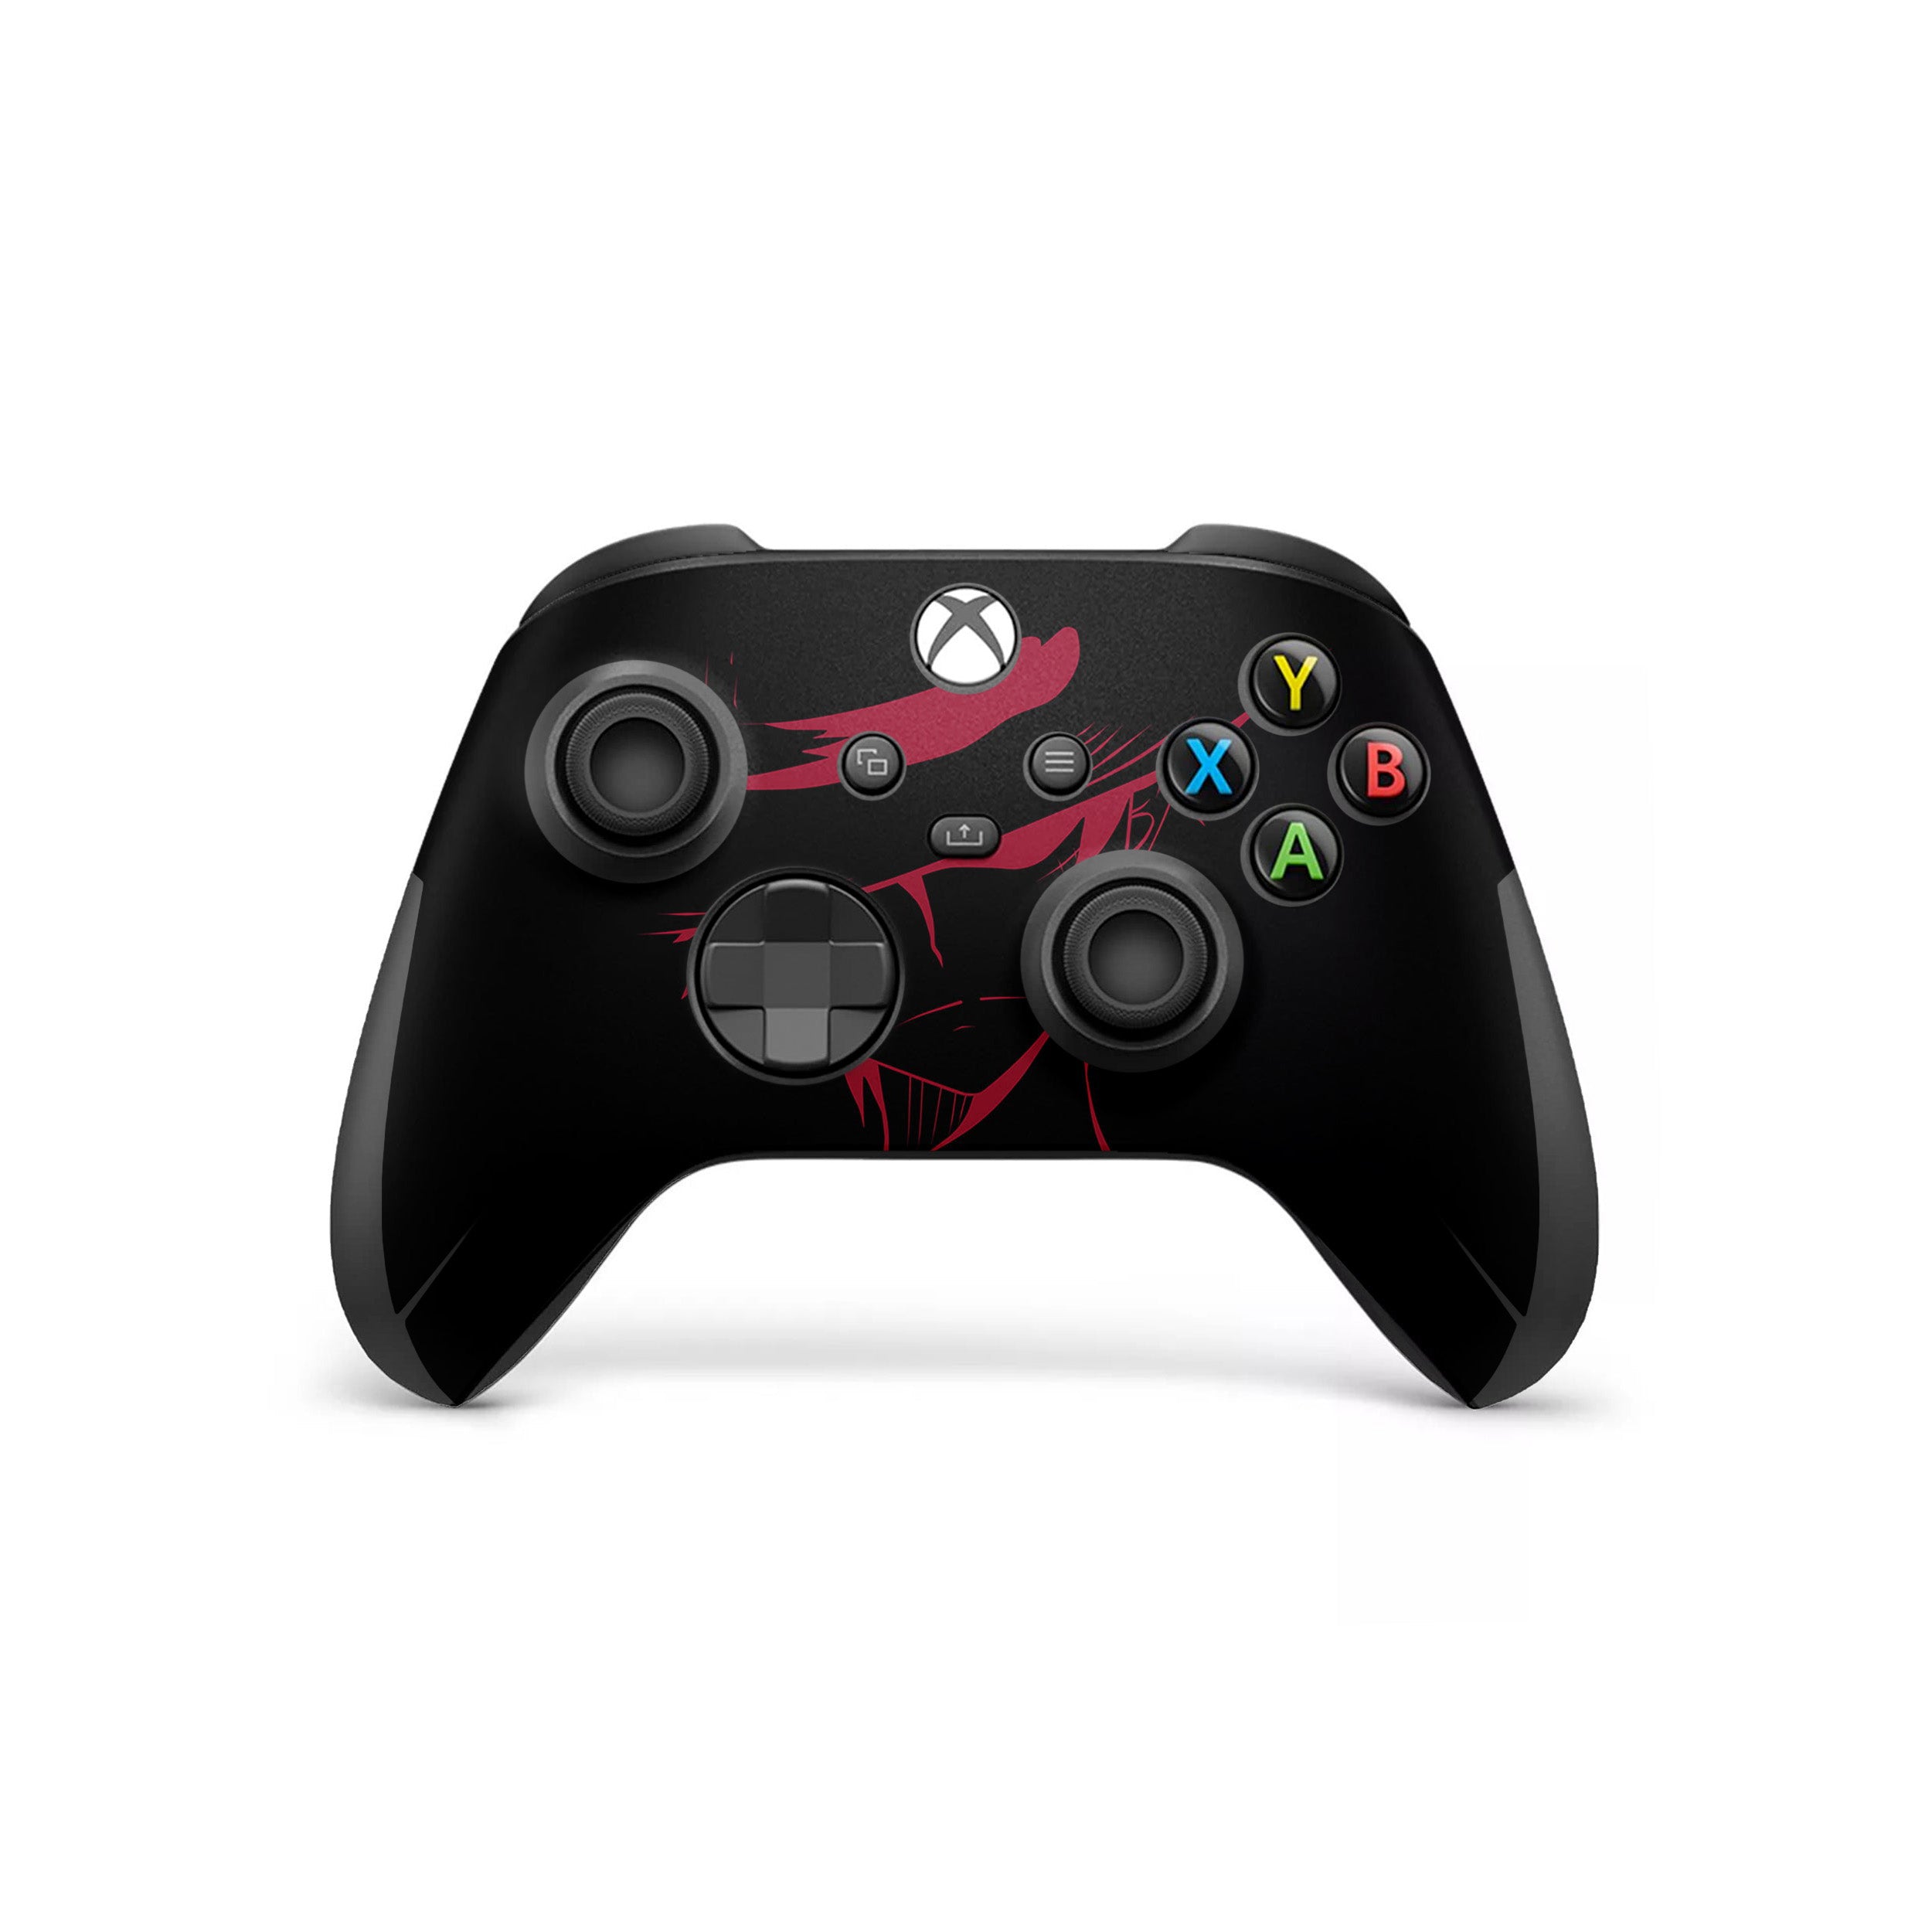 A video game skin featuring a One Piece Monkey D Luffy design for the Xbox Wireless Controller.